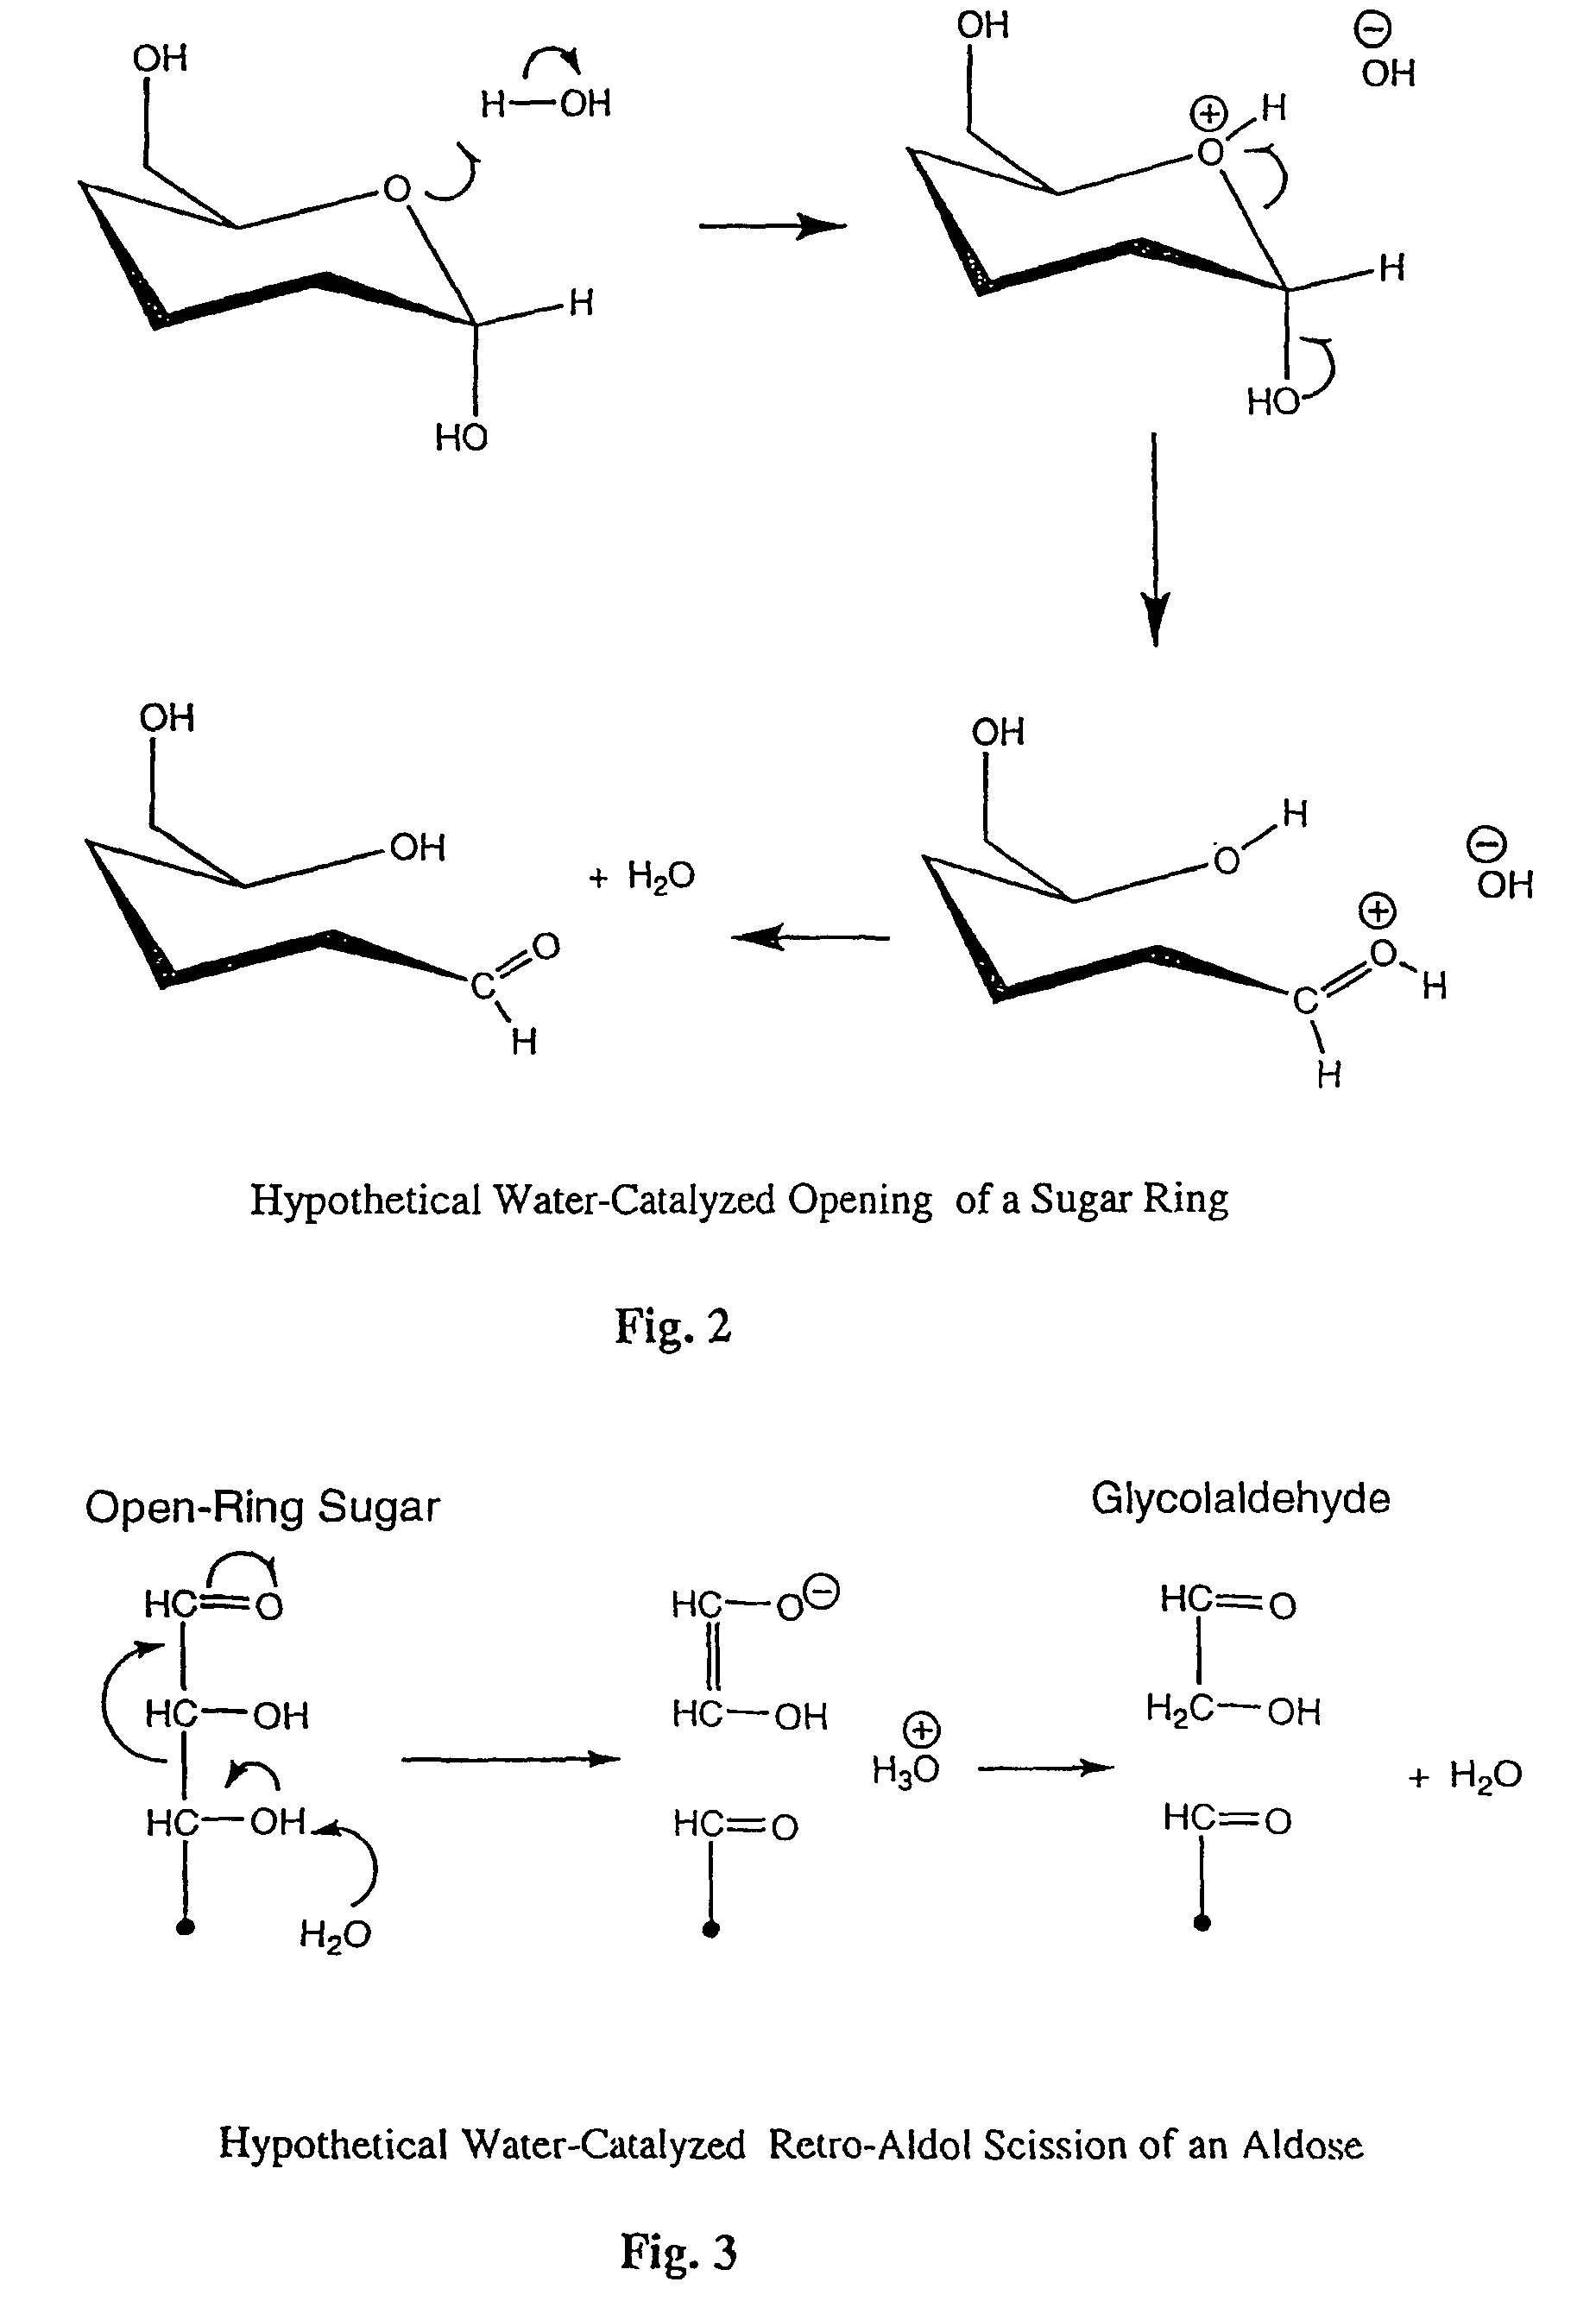 Production of glycolaldehyde by hydrous thermolysis of sugars